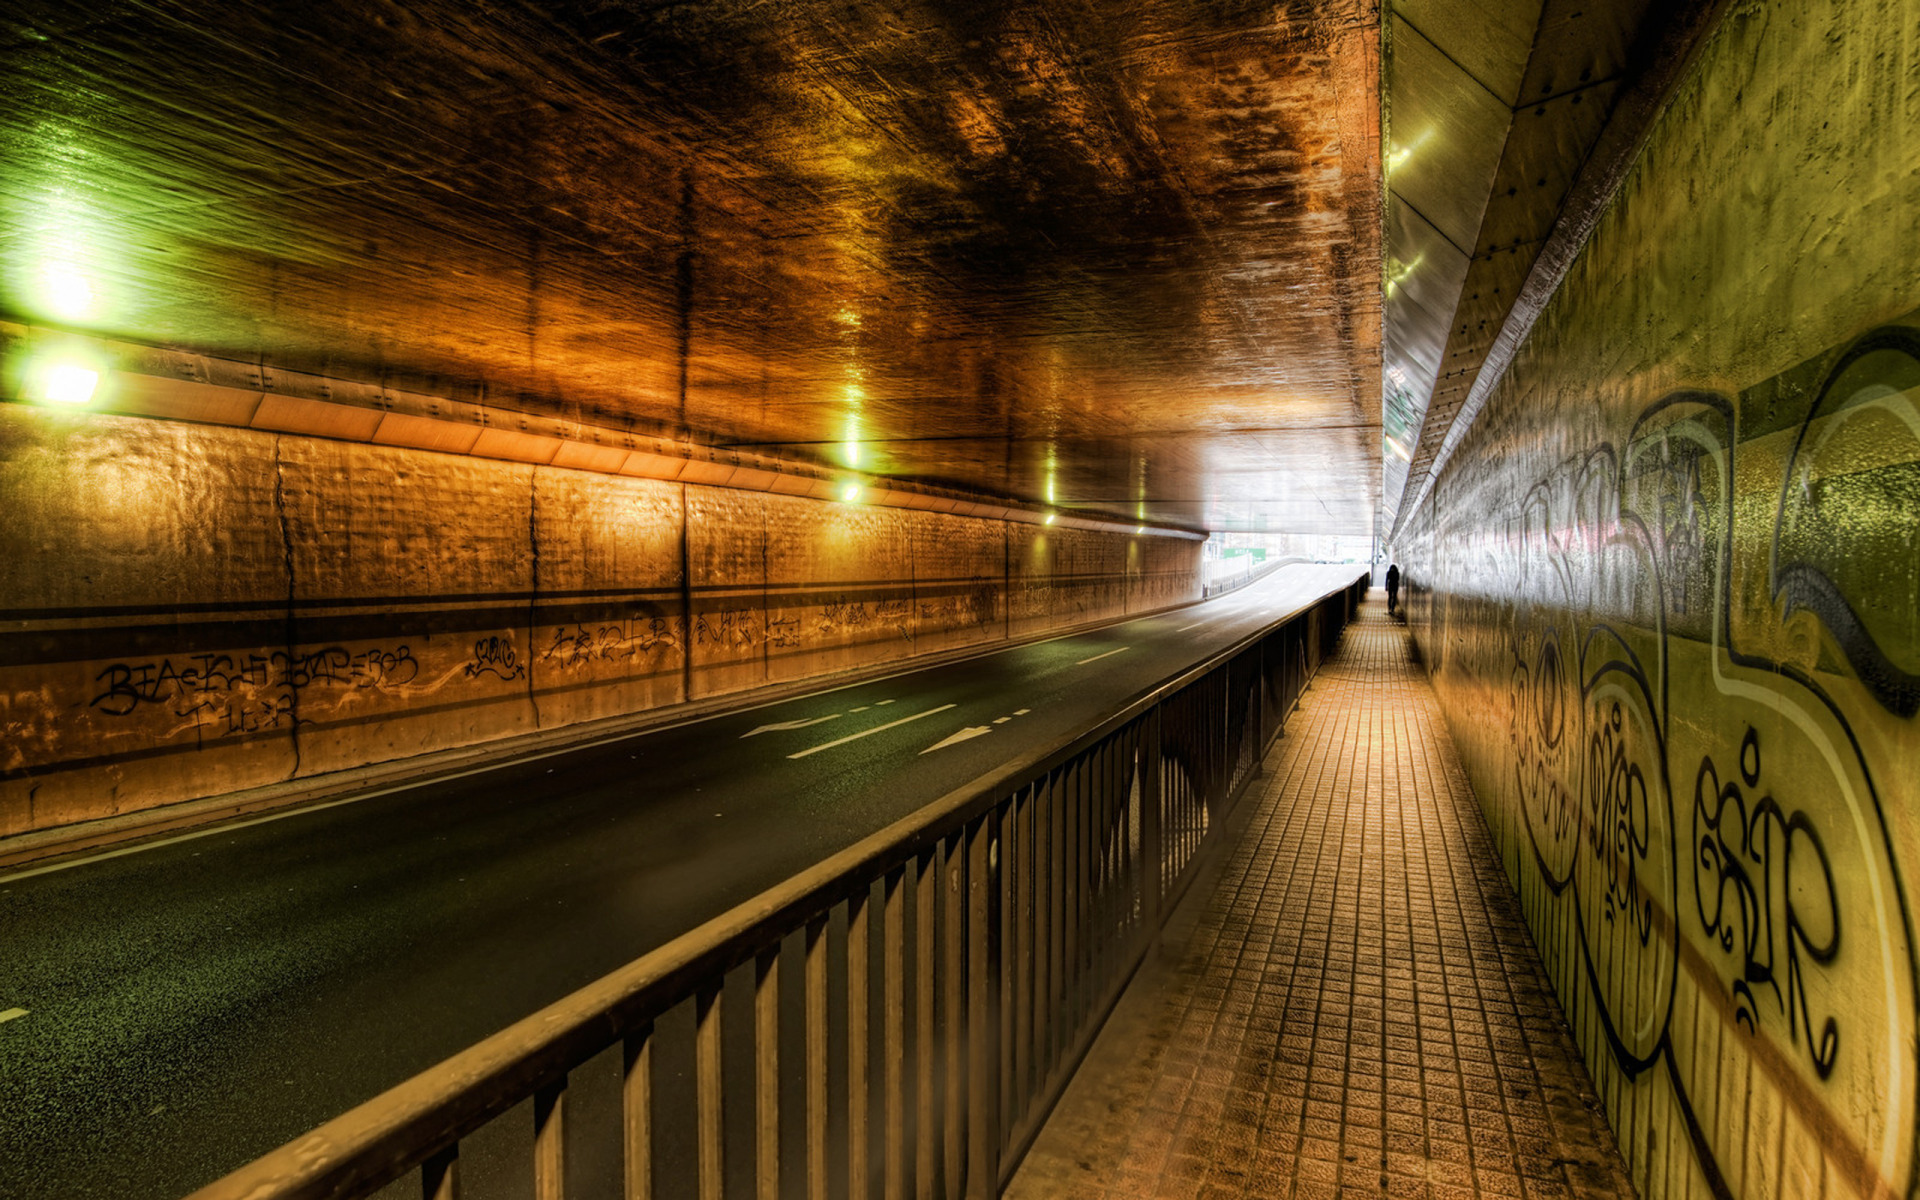 tunnel wallpaper,tunnel,light,subway,infrastructure,yellow